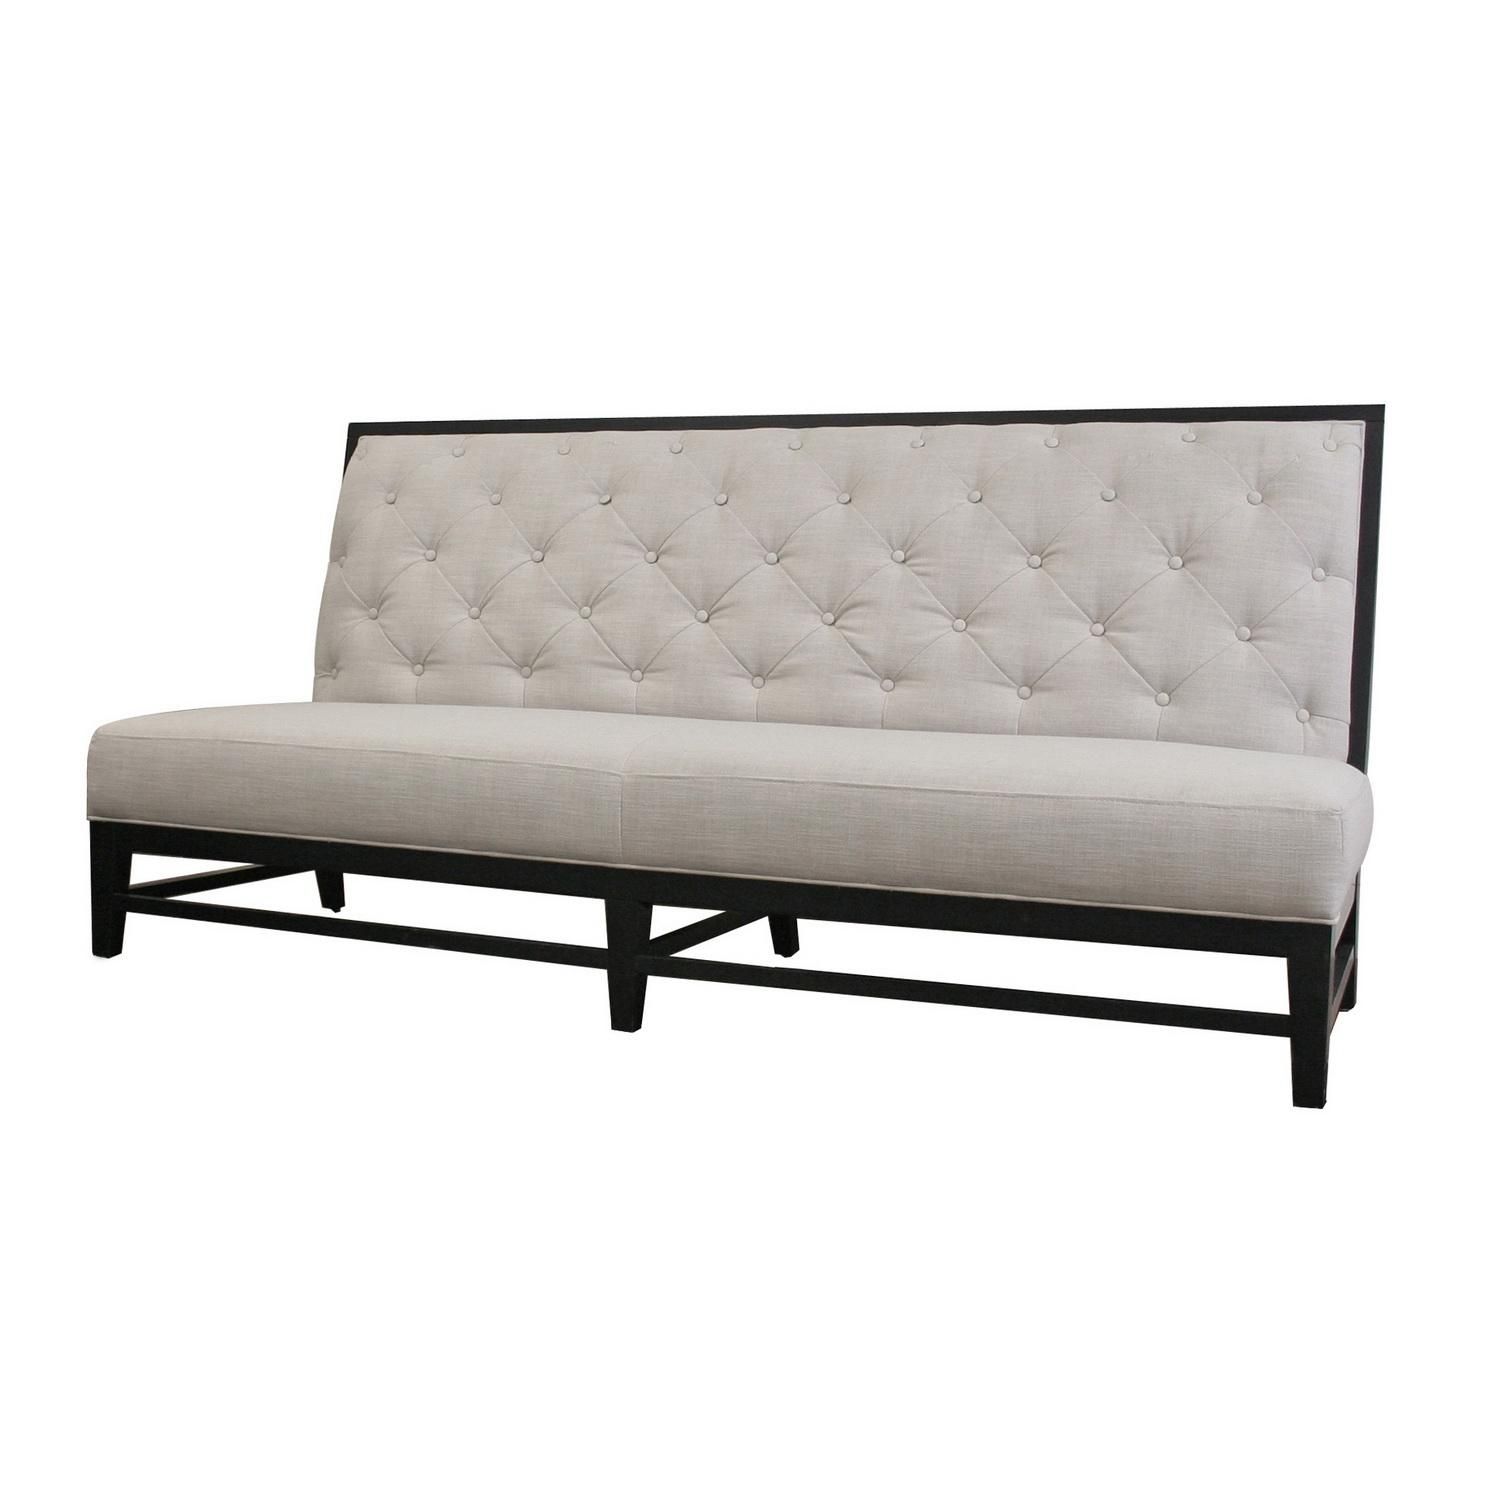 White Leather Modern Tufted Sofa With Black Wooden Frame For Intended For Leather Bench Sofas (View 13 of 22)